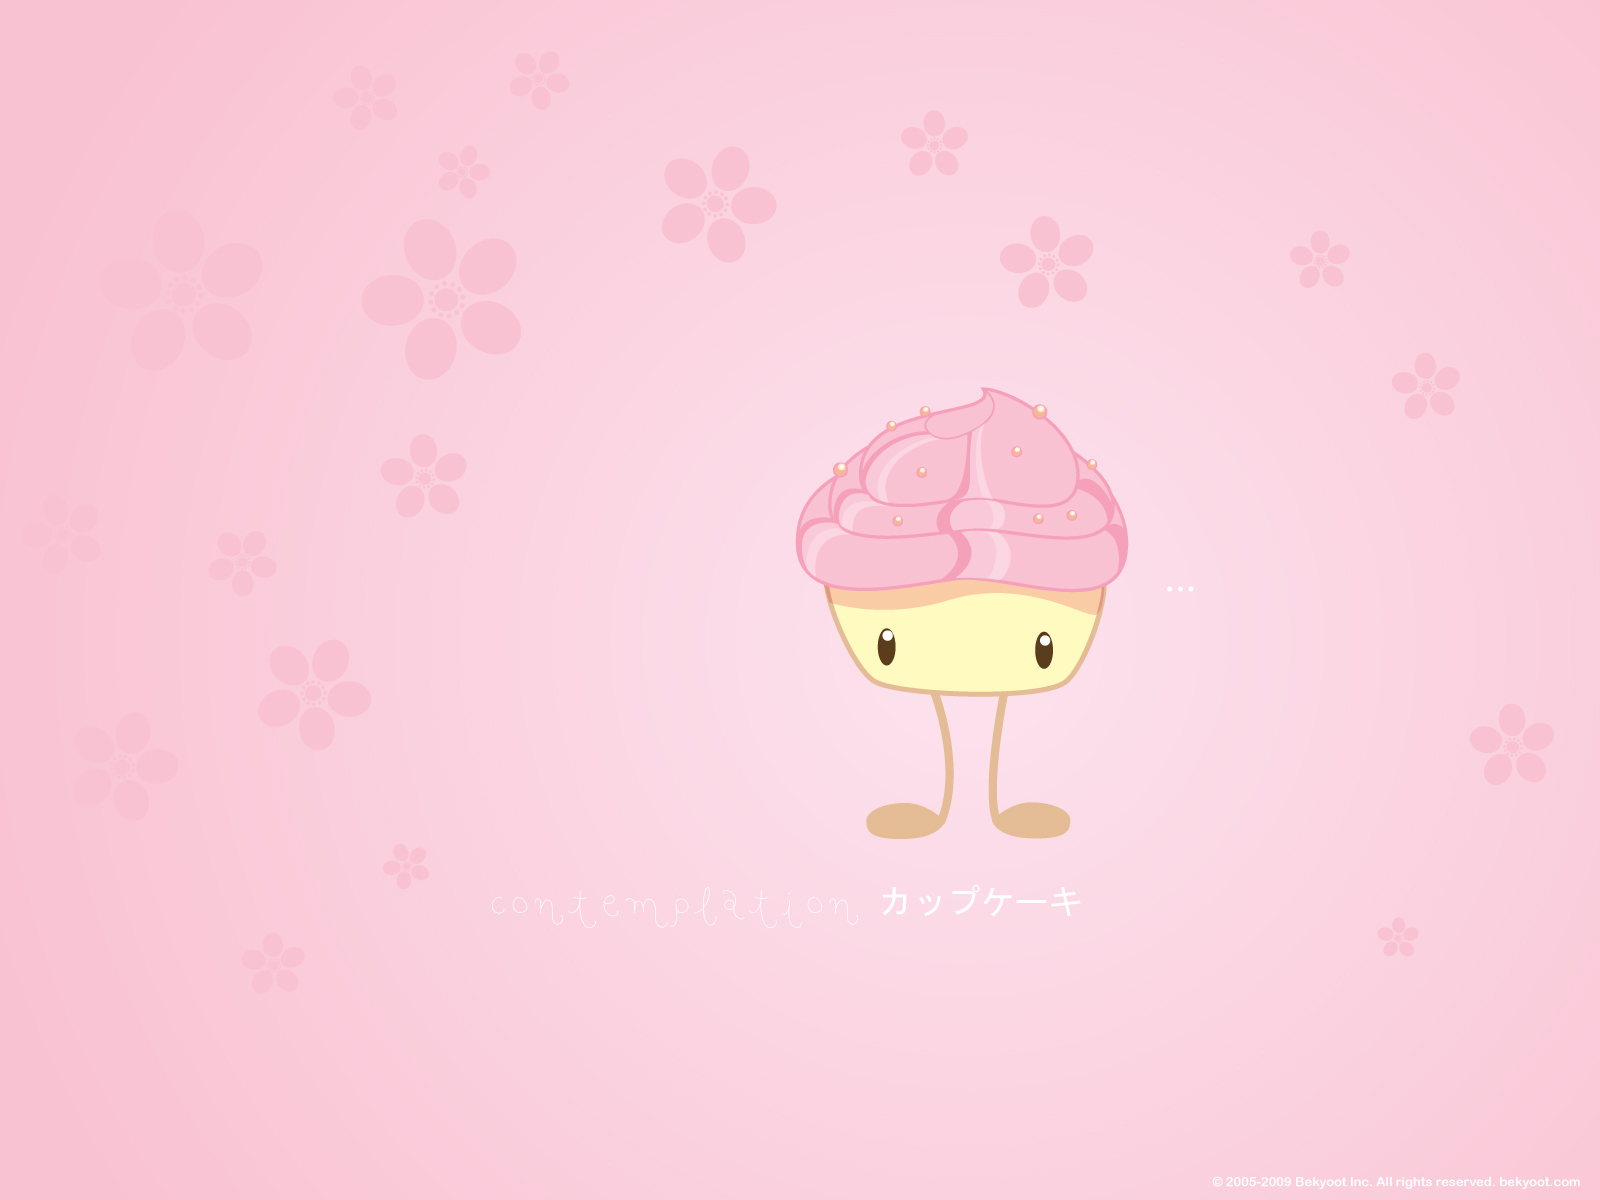 Hello Kitty Wallpaper with Cupcake and Bow